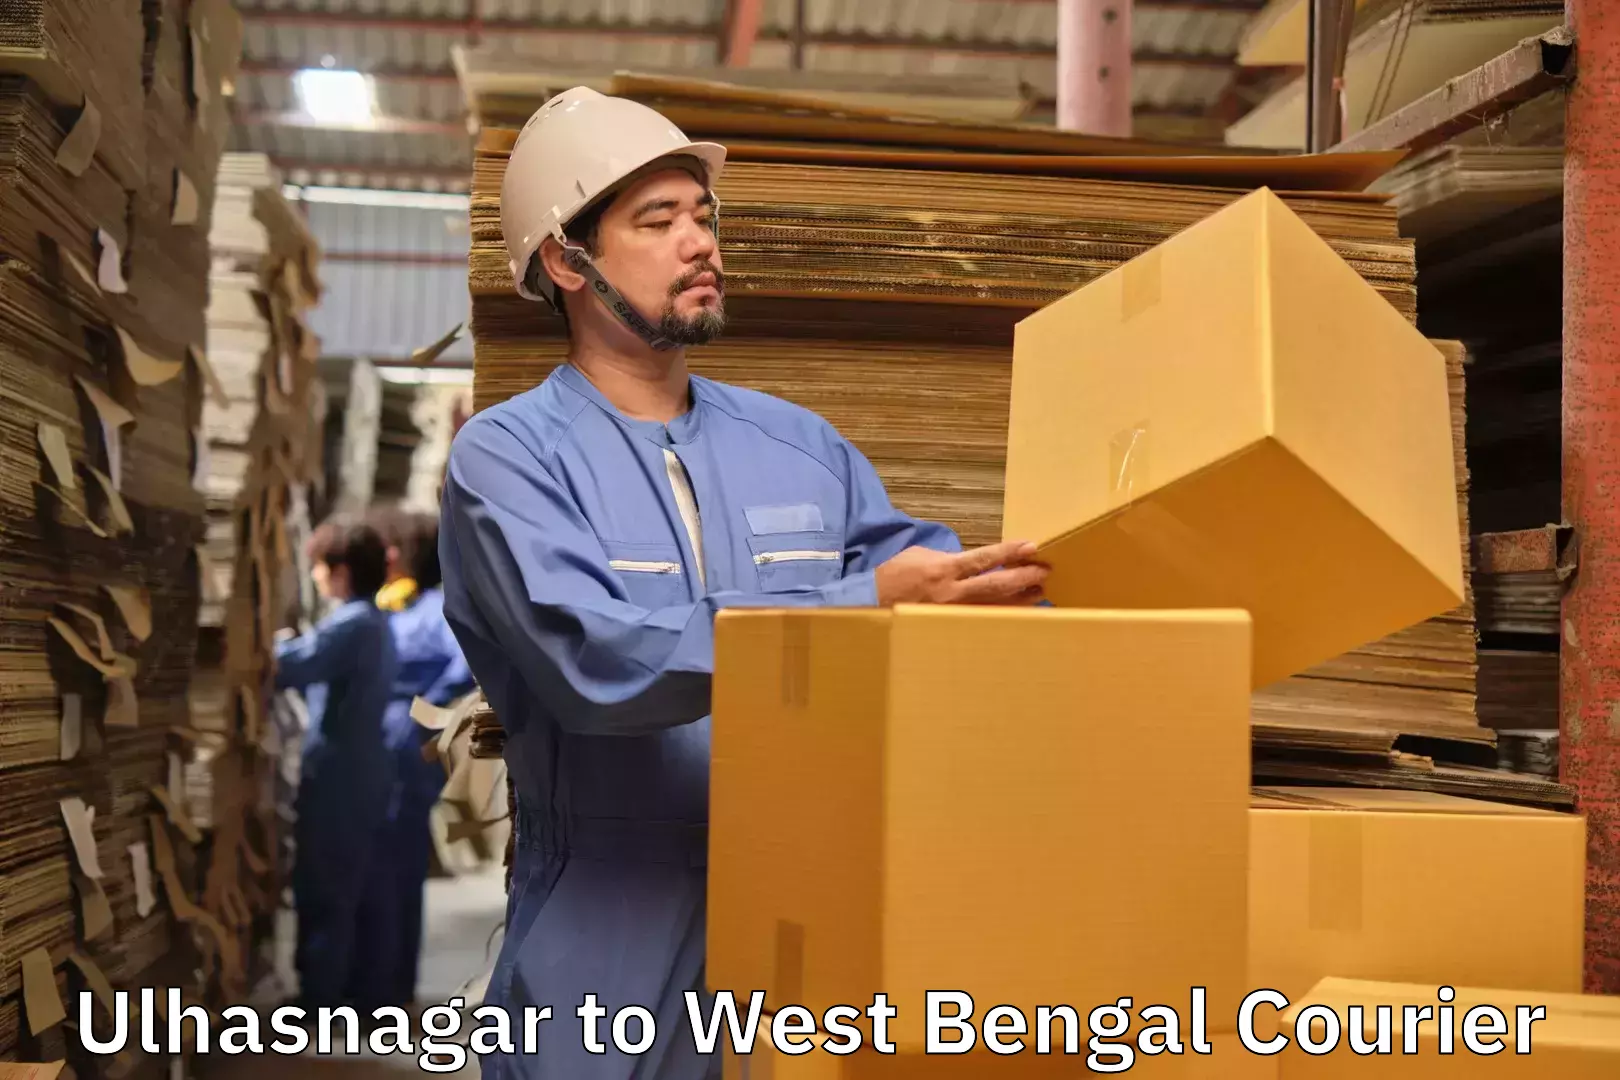 Luggage shipment specialists Ulhasnagar to West Bengal